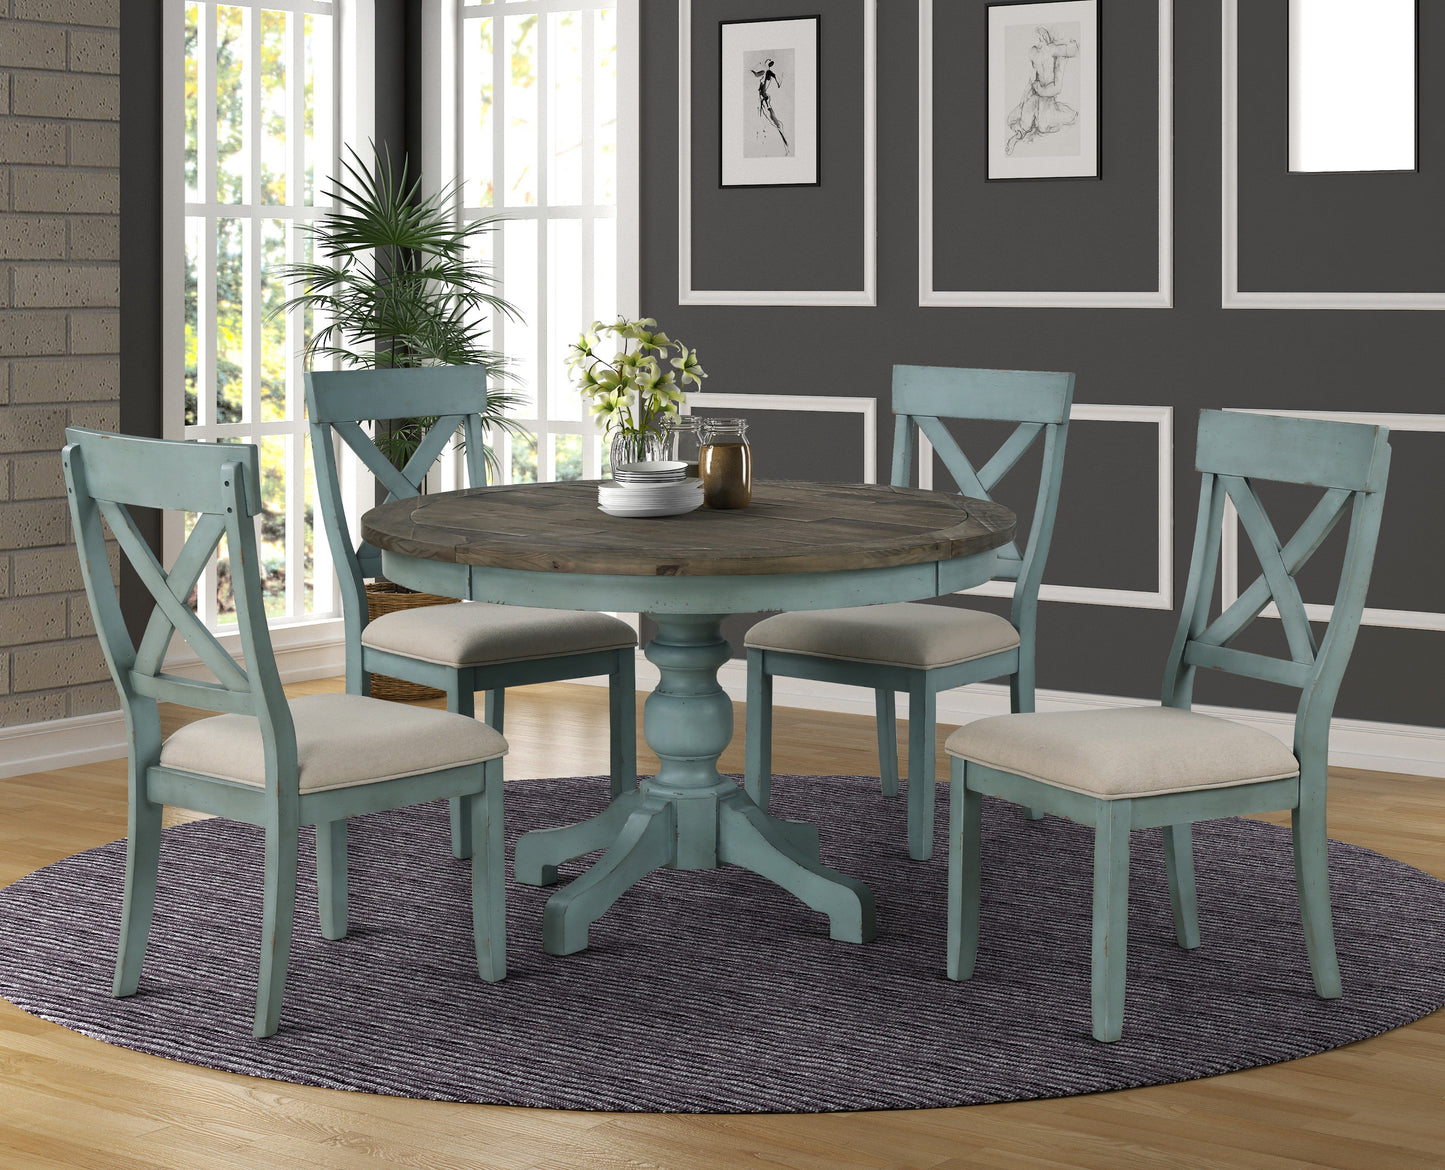 Prato Round Blue and Brown Two-Tone Finish Wood Dining Table